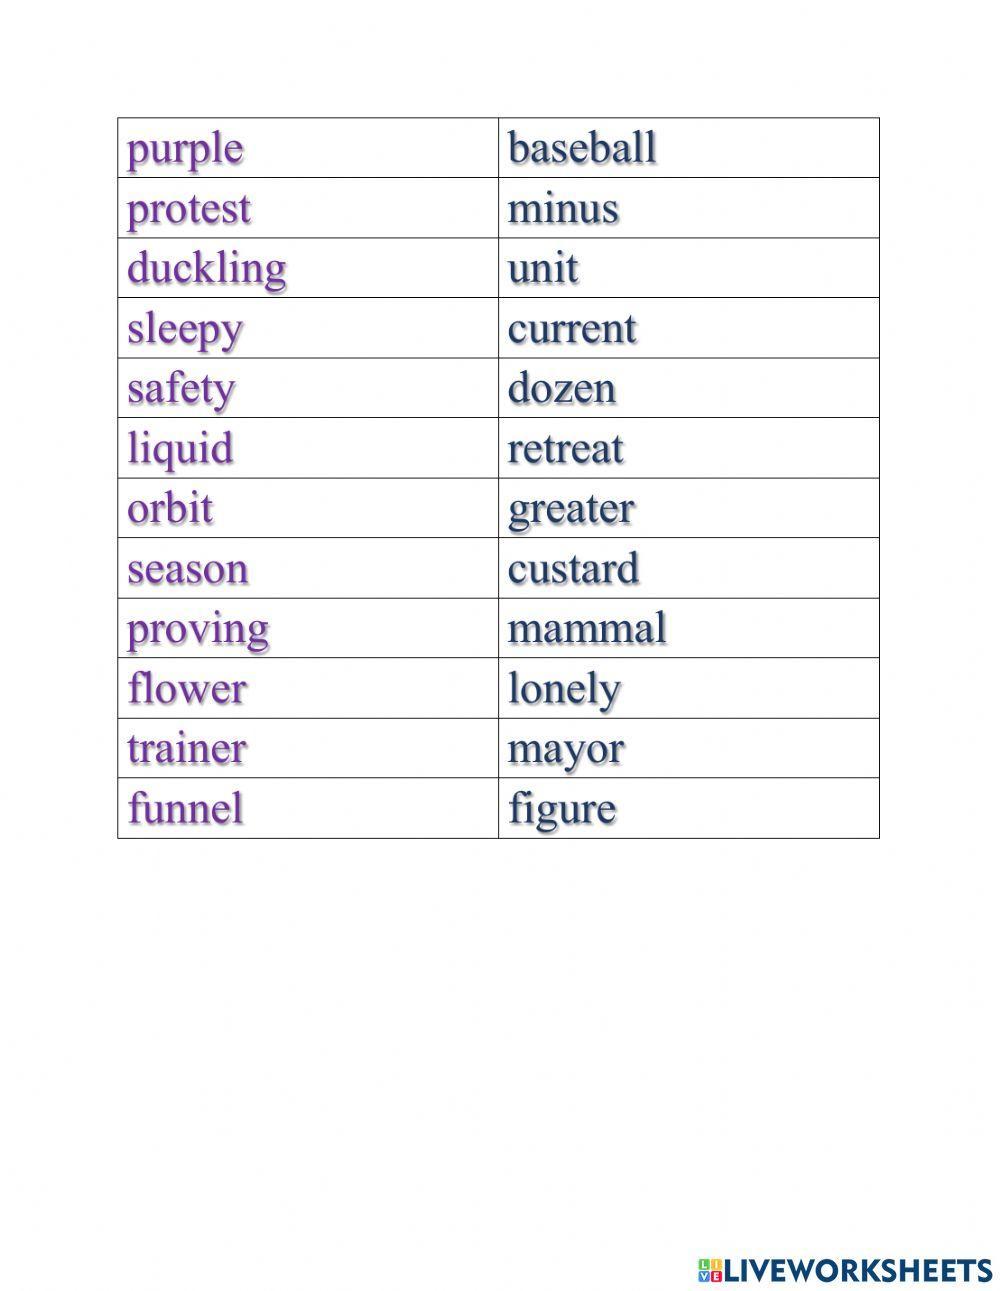 Practice two-syllable words